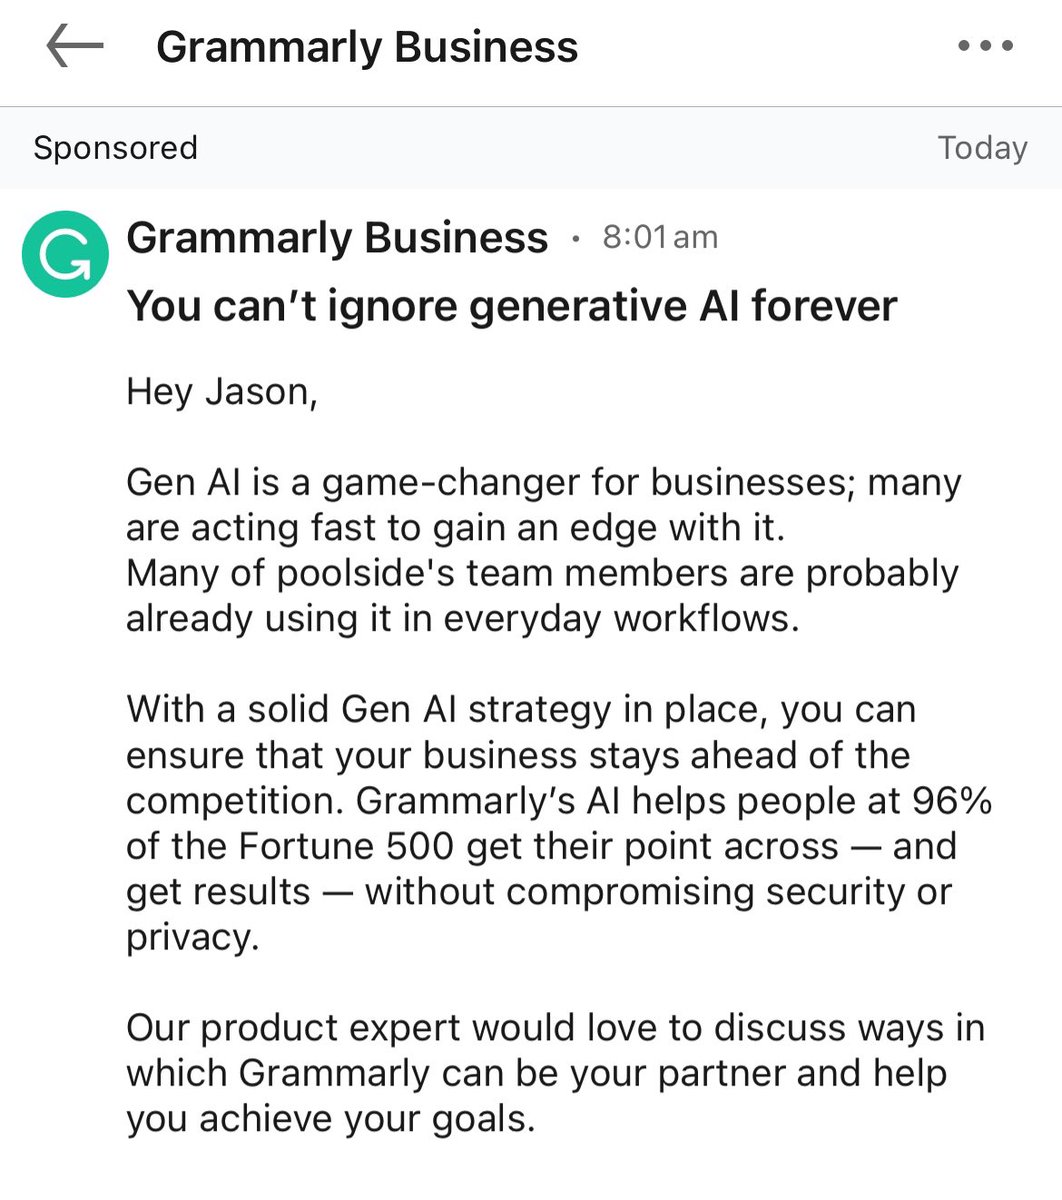 Thanks Grammarly, I wouldn’t say I was ignoring it per se though